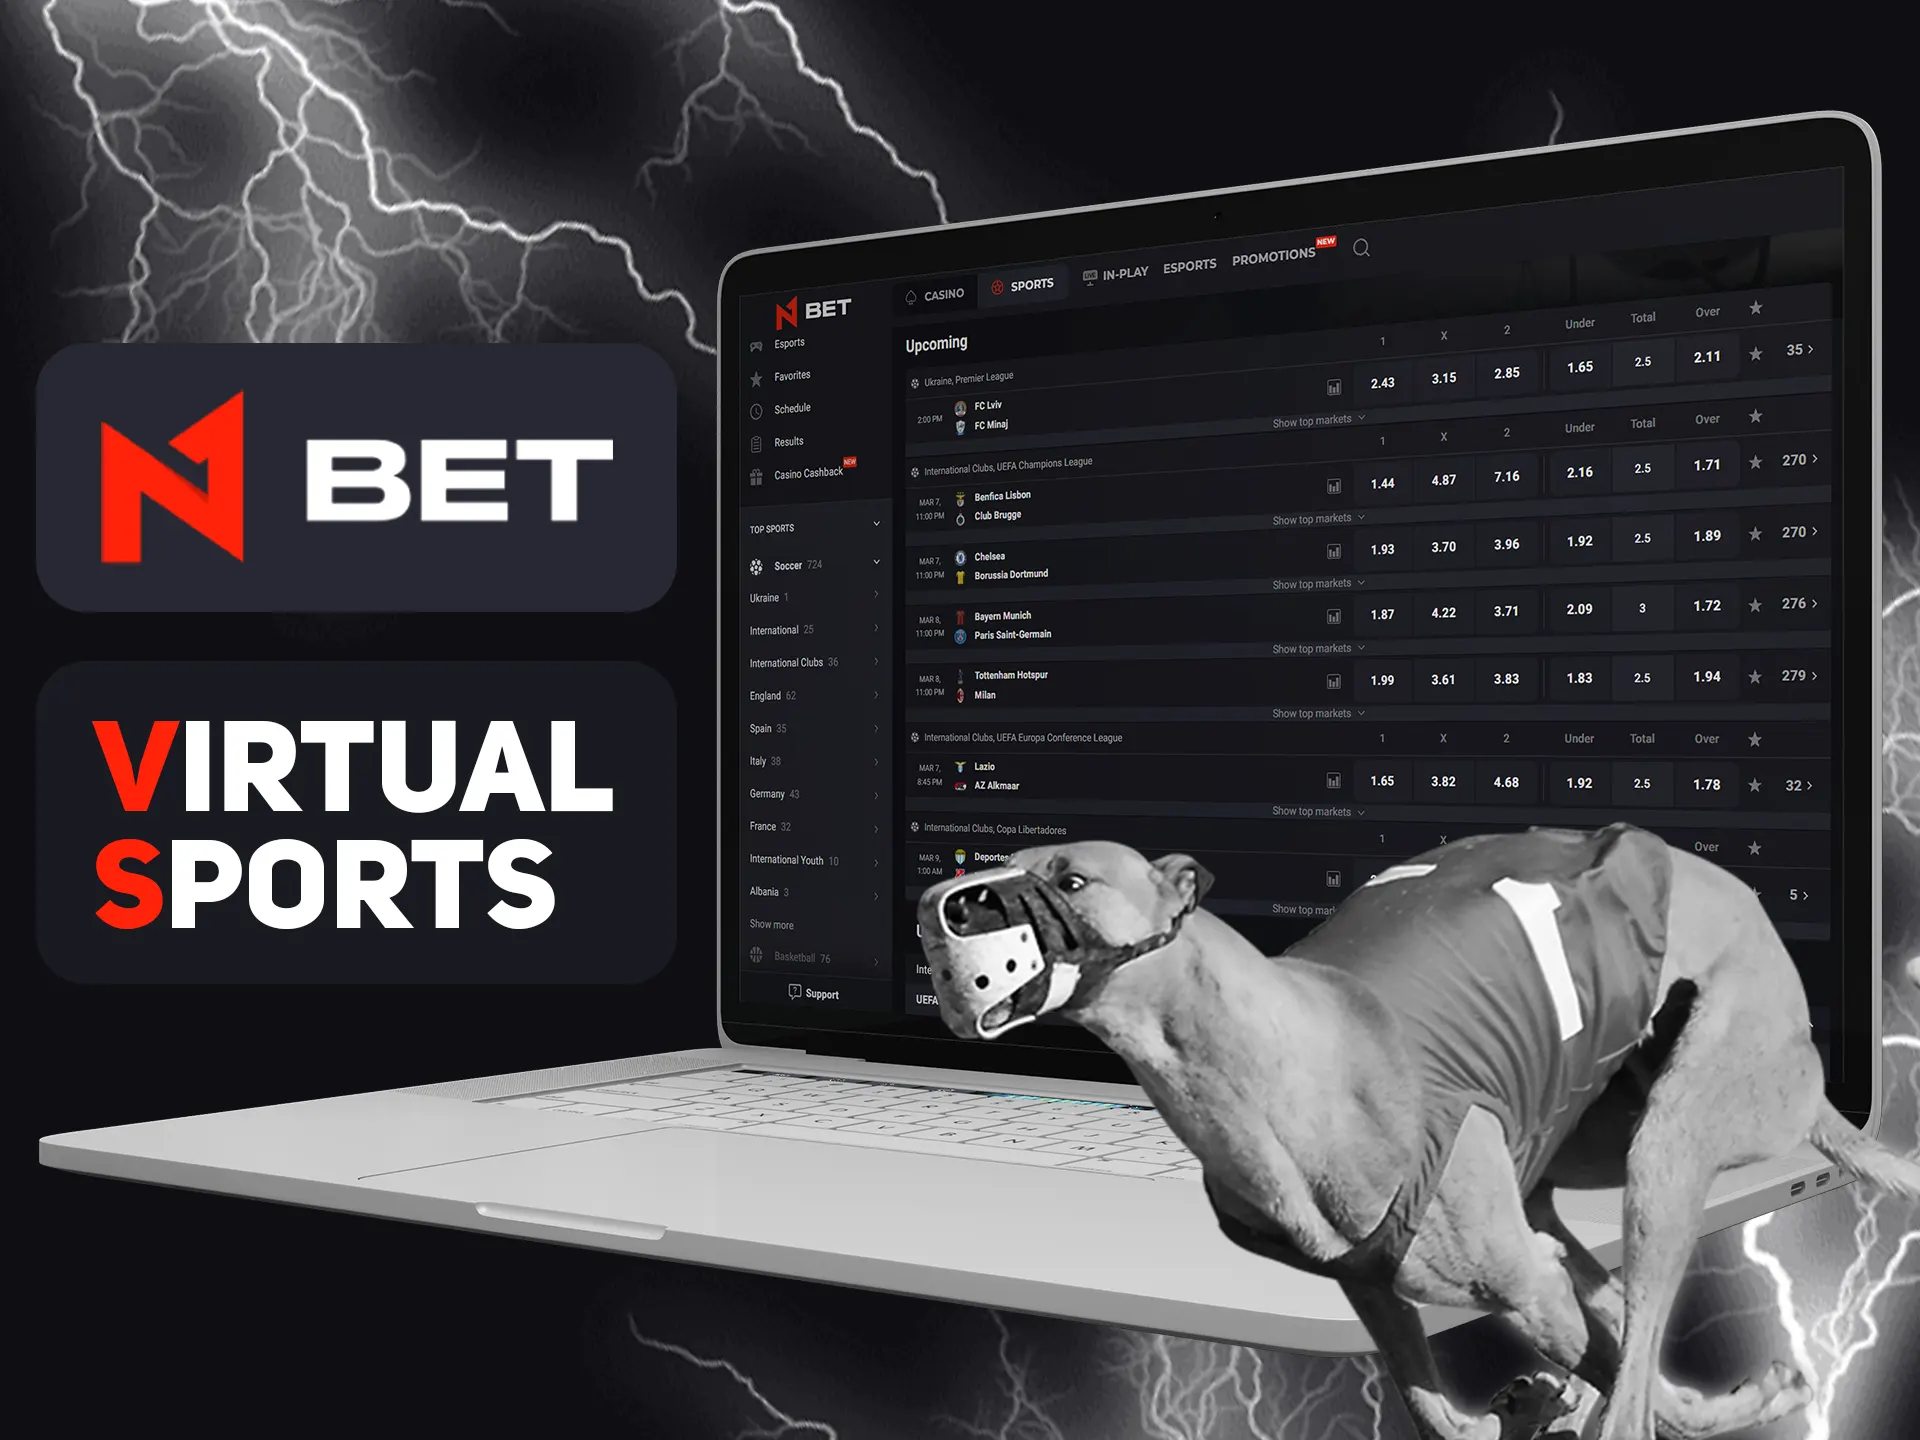 Bet on exotic virtual sports at N1bet.